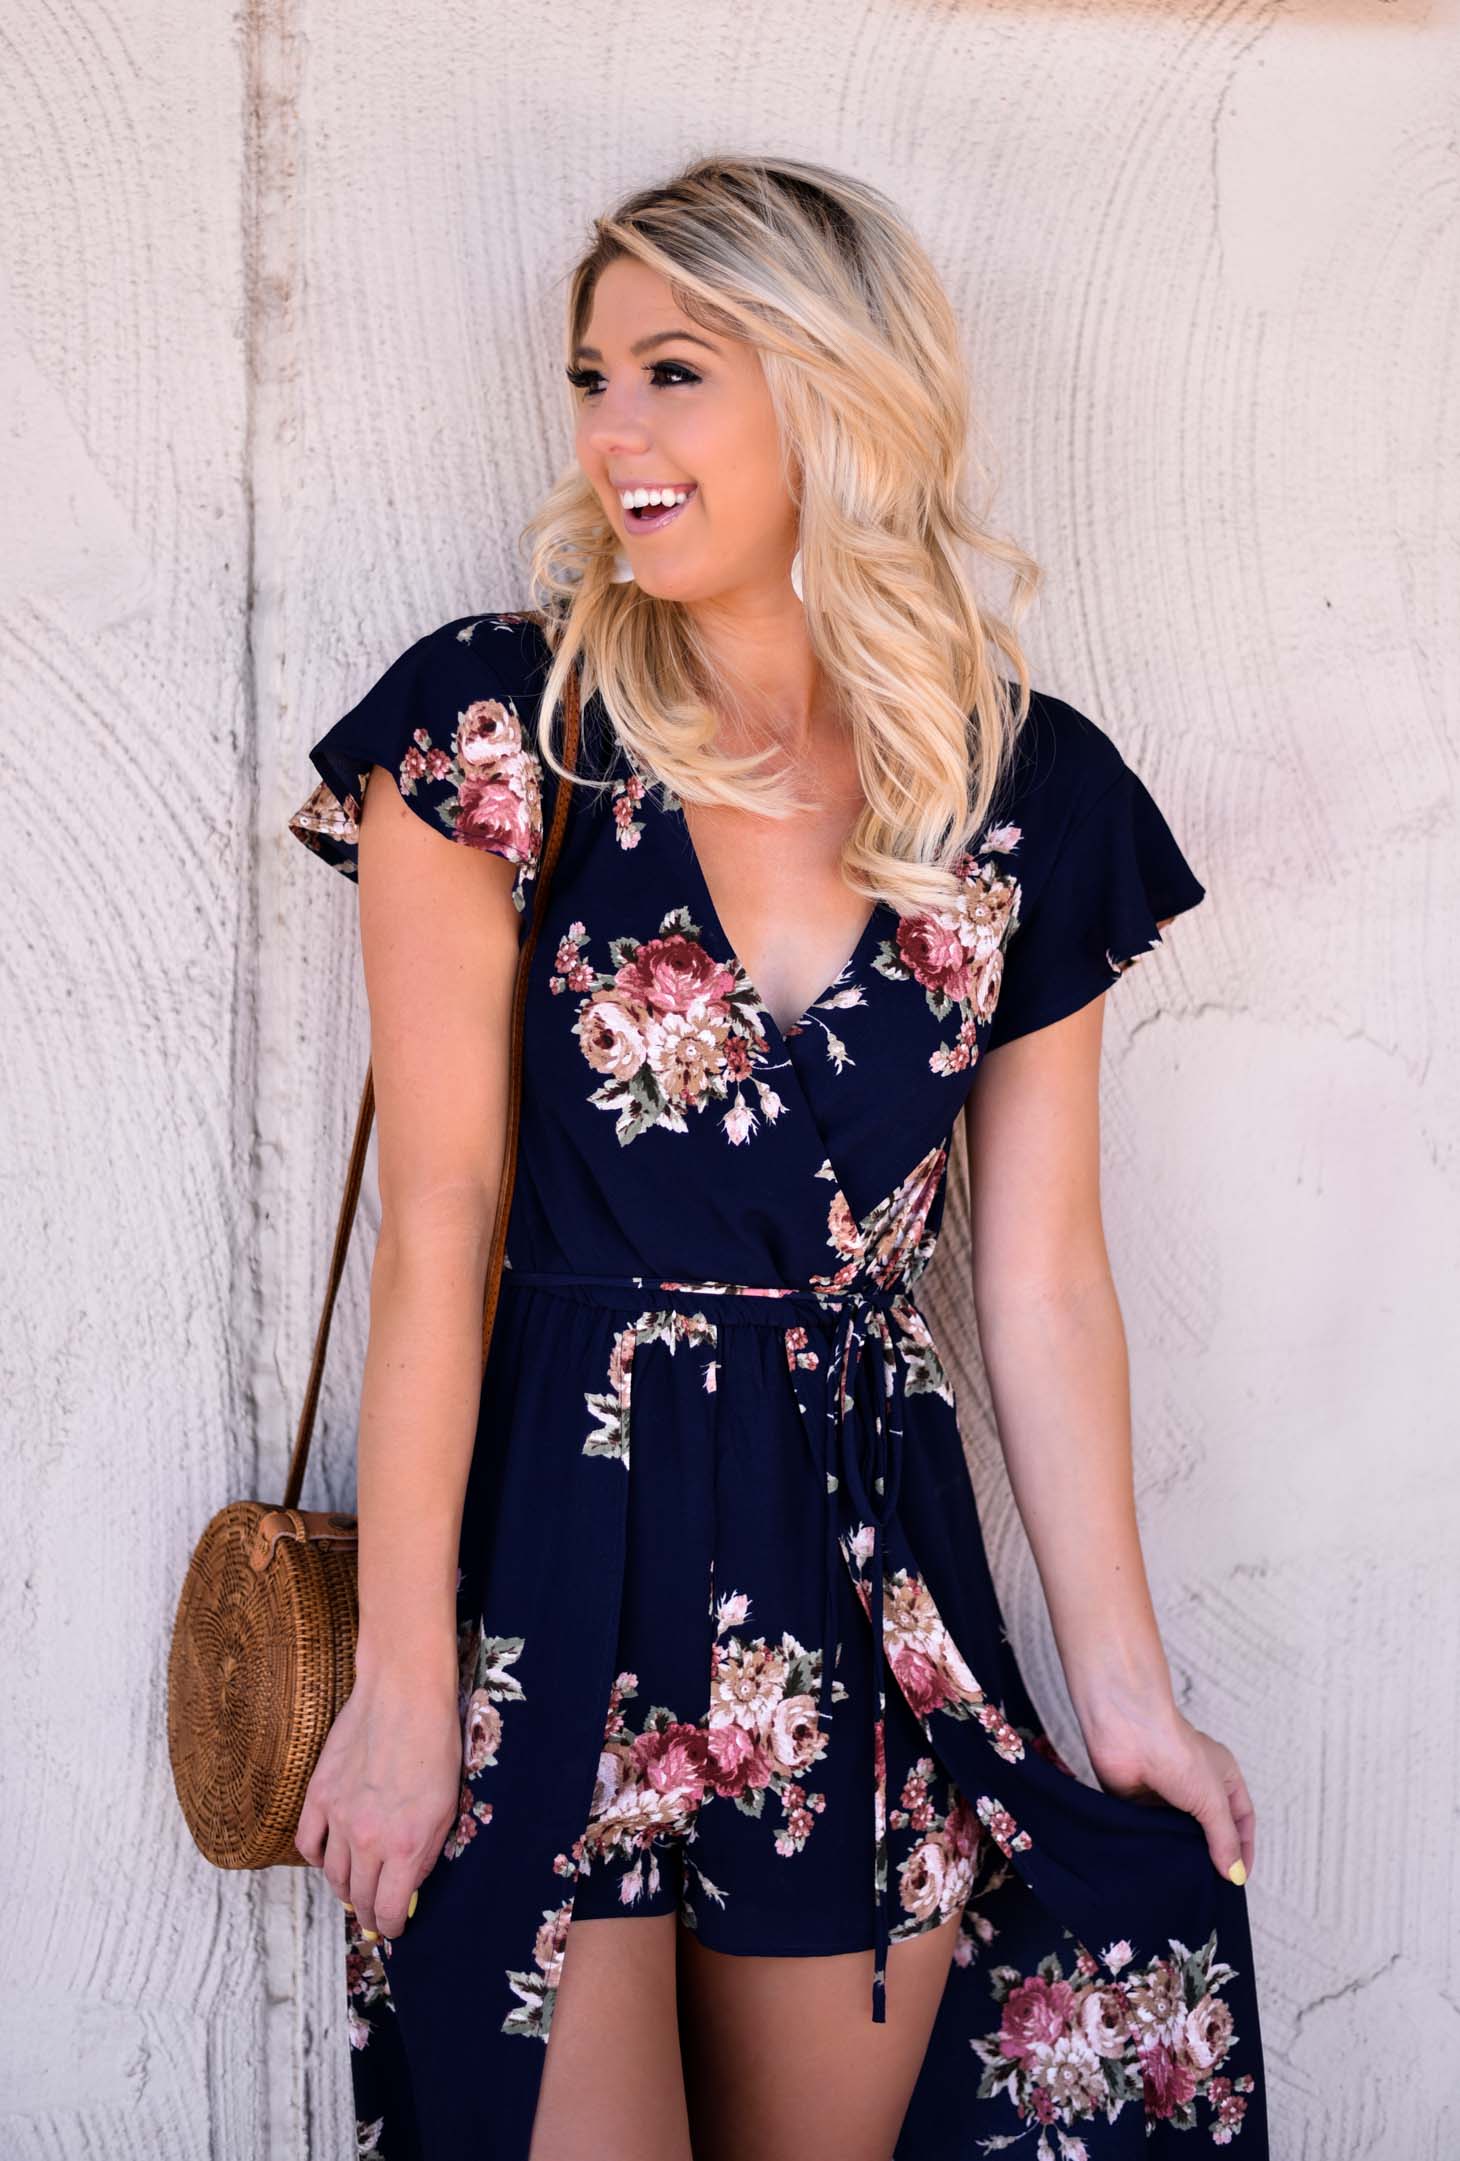 The Romper Maxi Under $50 - Wink and a Twirl